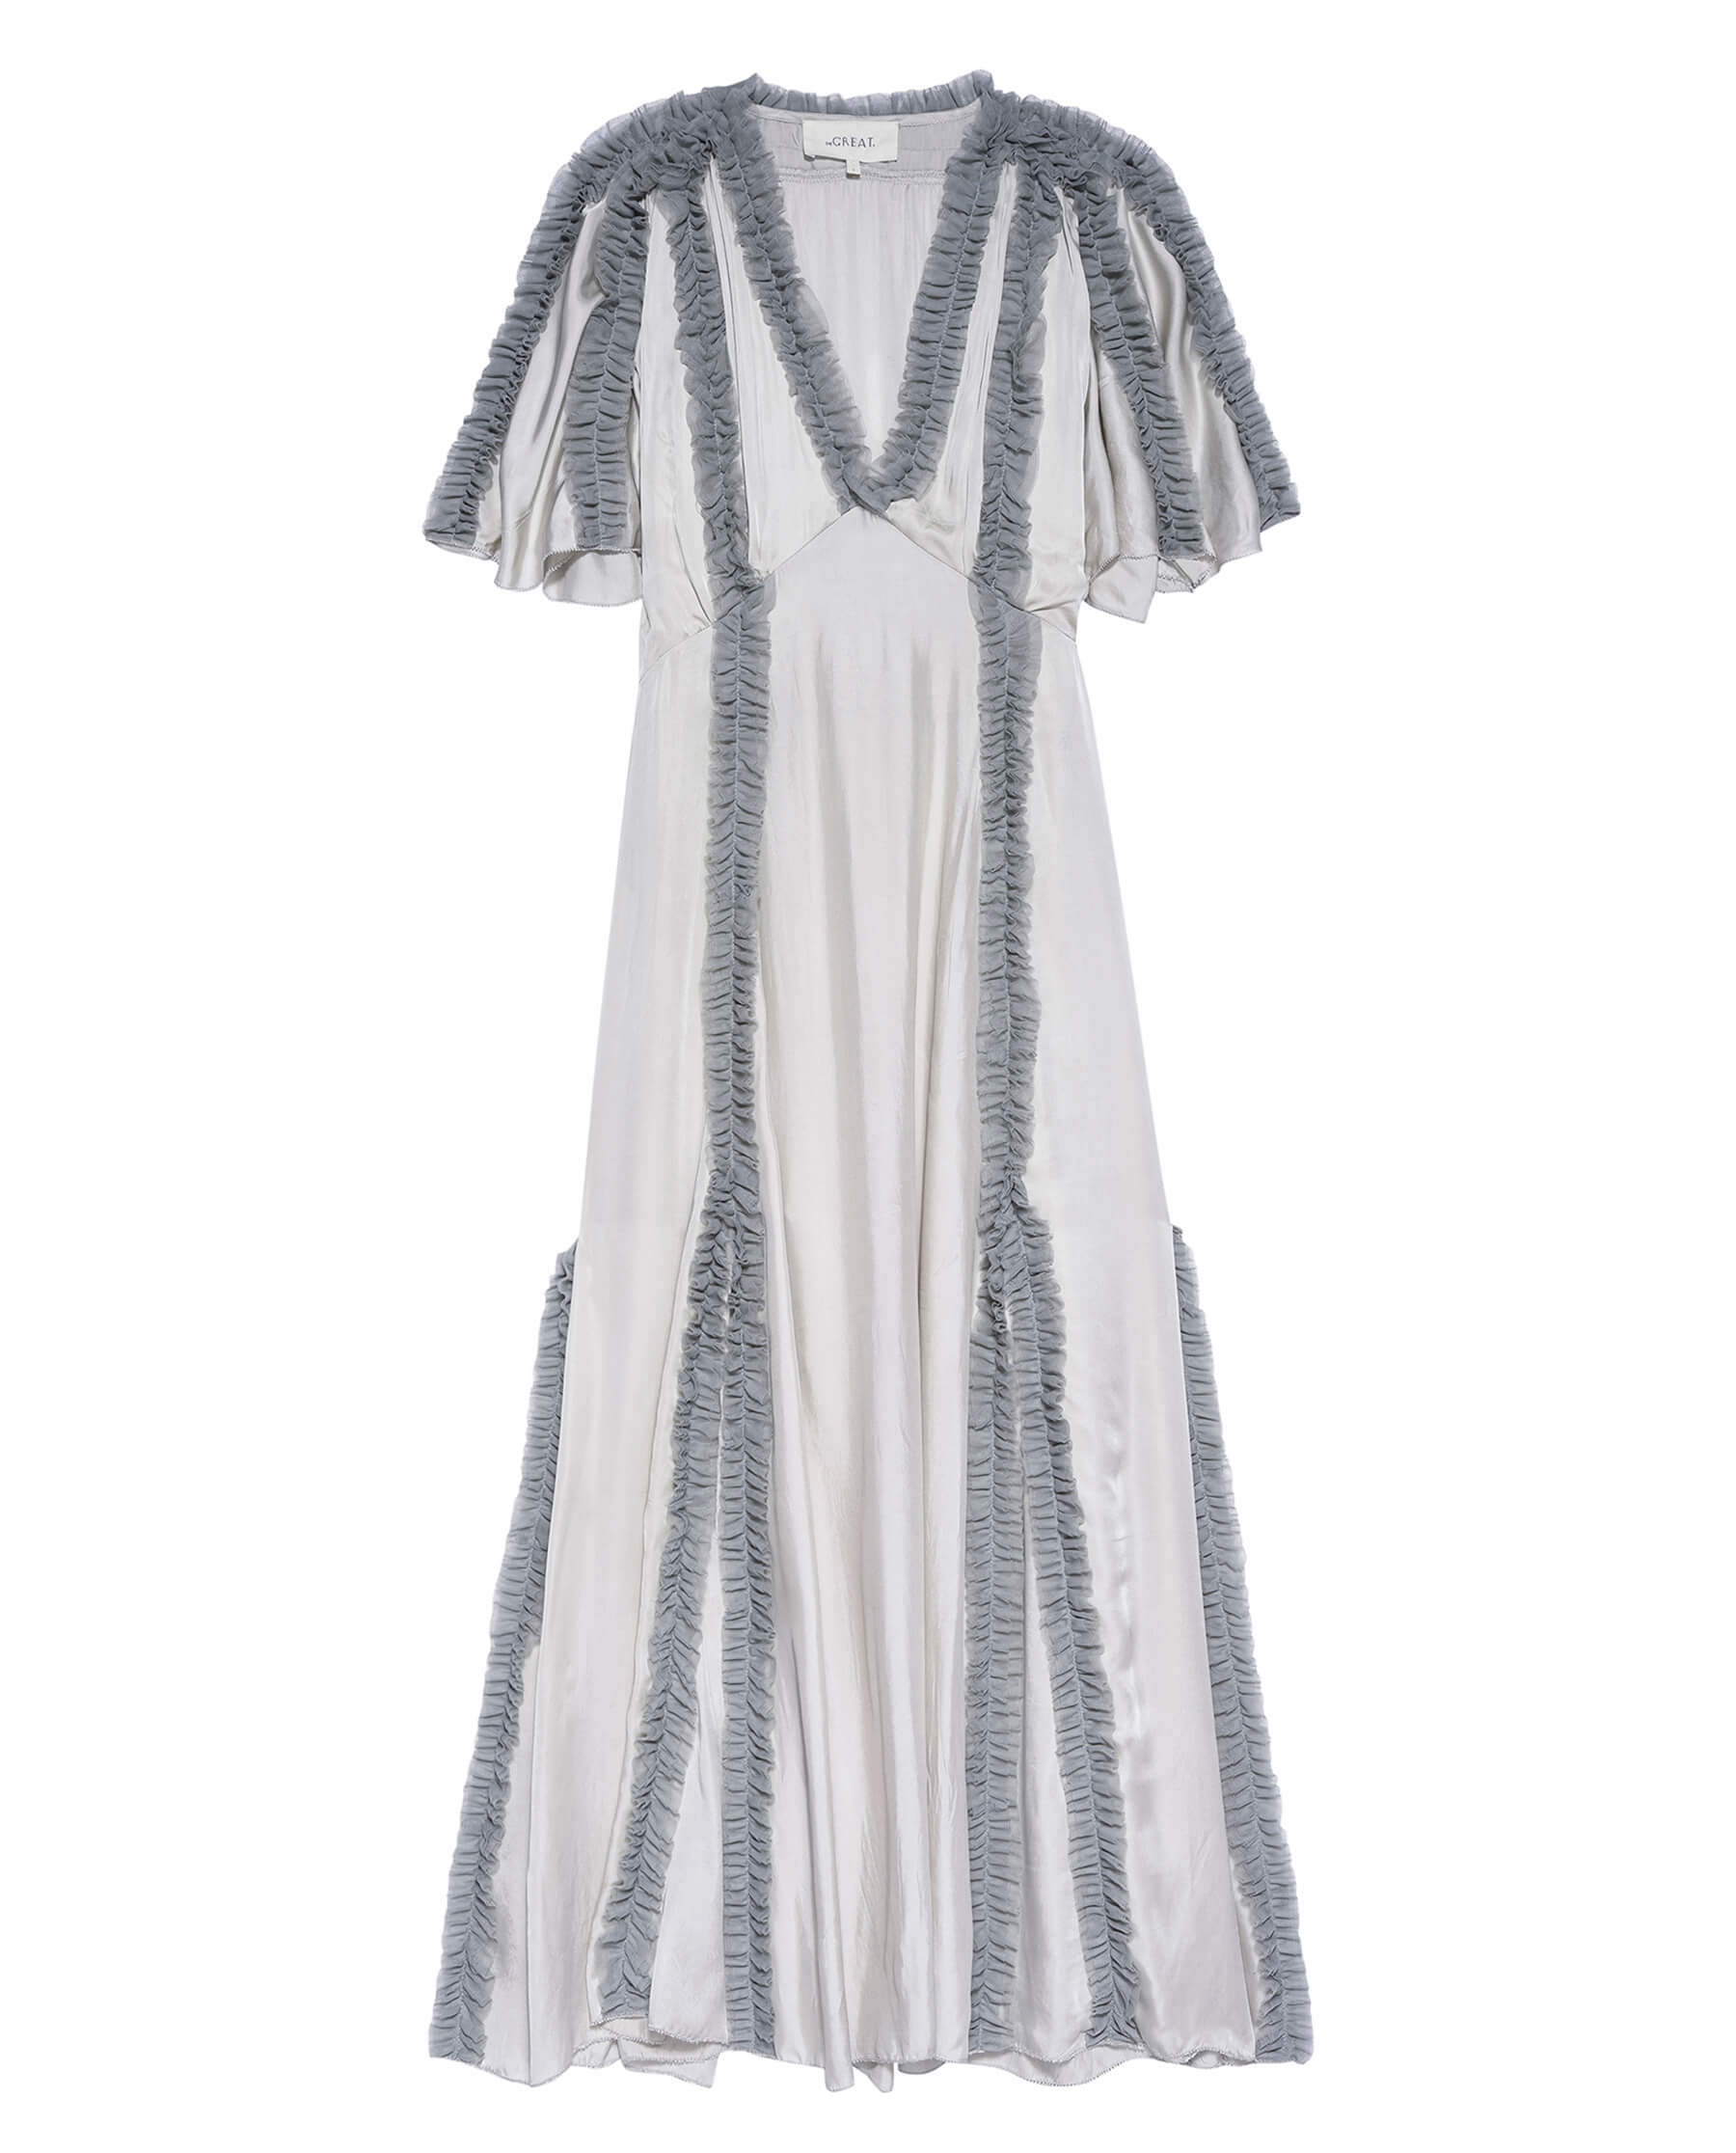 The Dancehall Dress. -- Silver with Icy Blue DRESSES THE GREAT. HOL 23 VISCOSE MESH SALE